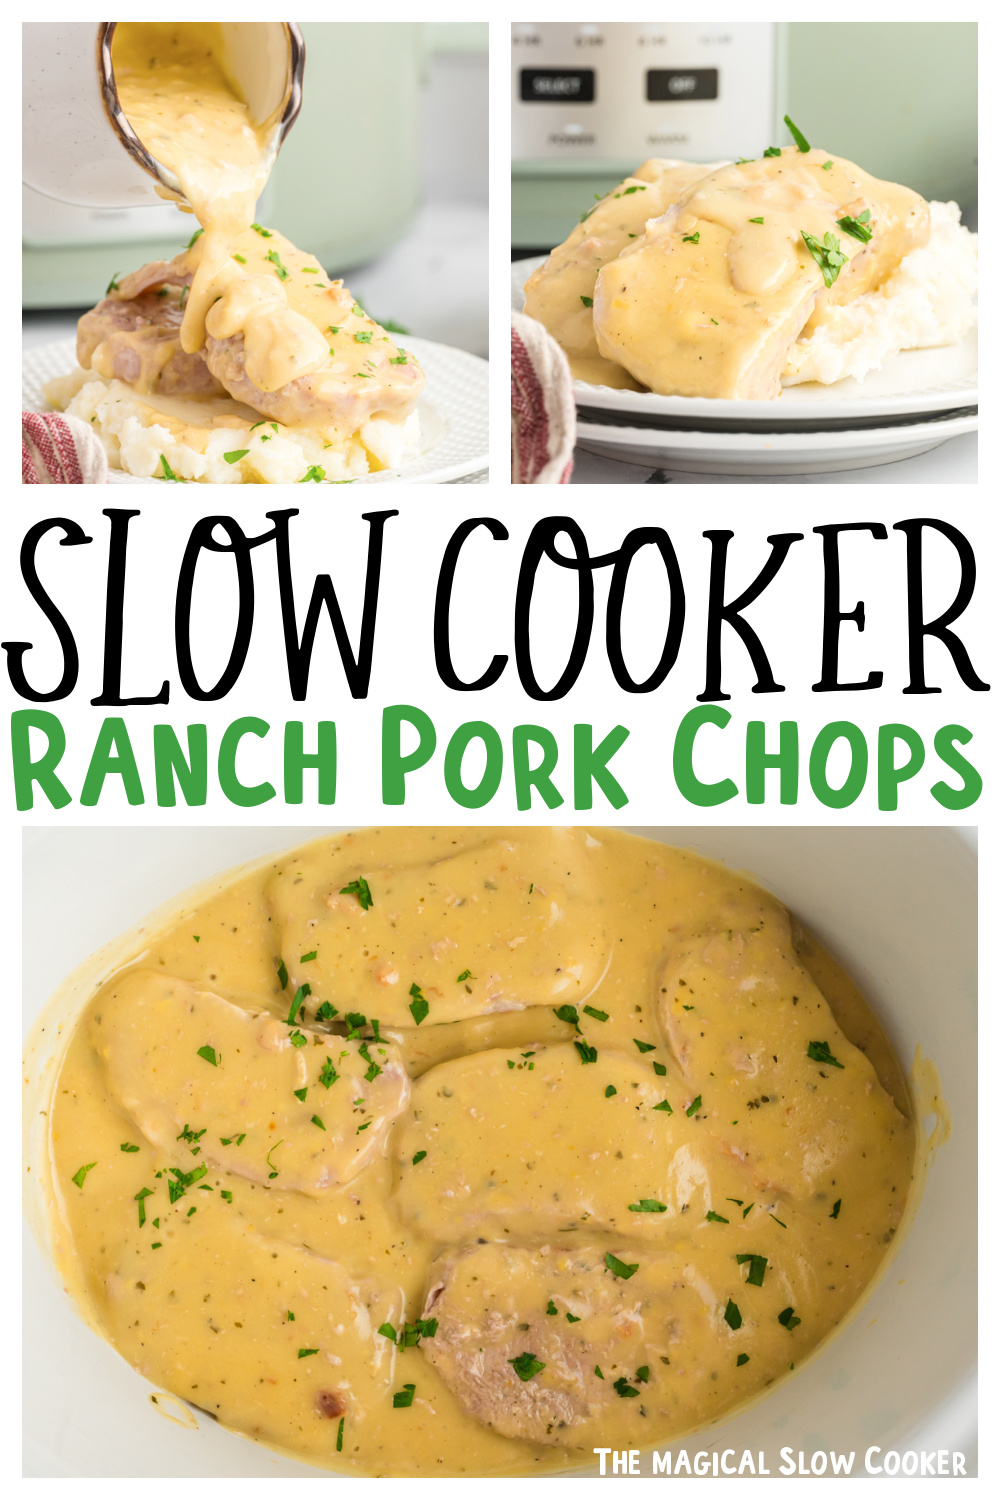 Slow Cooker Ranch Pork Chops - The Magical Slow Cooker